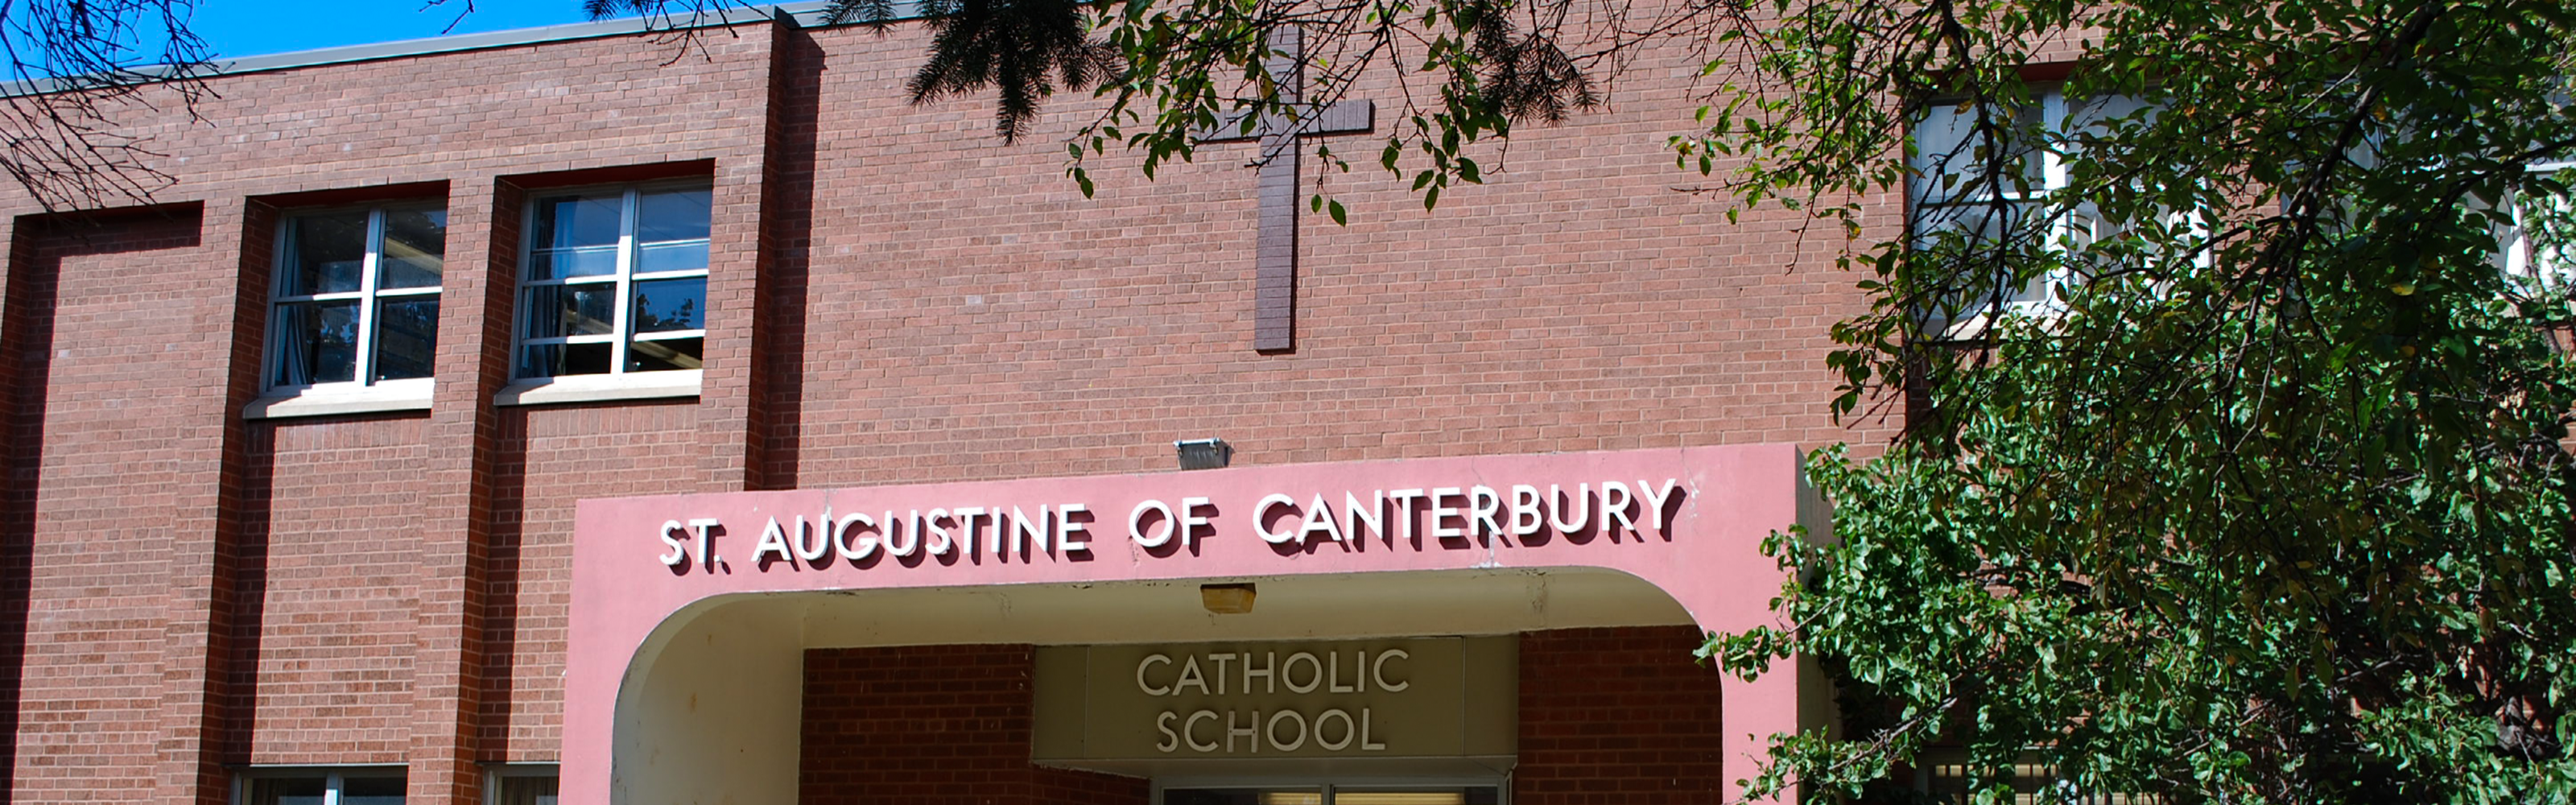 The front of the St. Augustine Catholic School building.